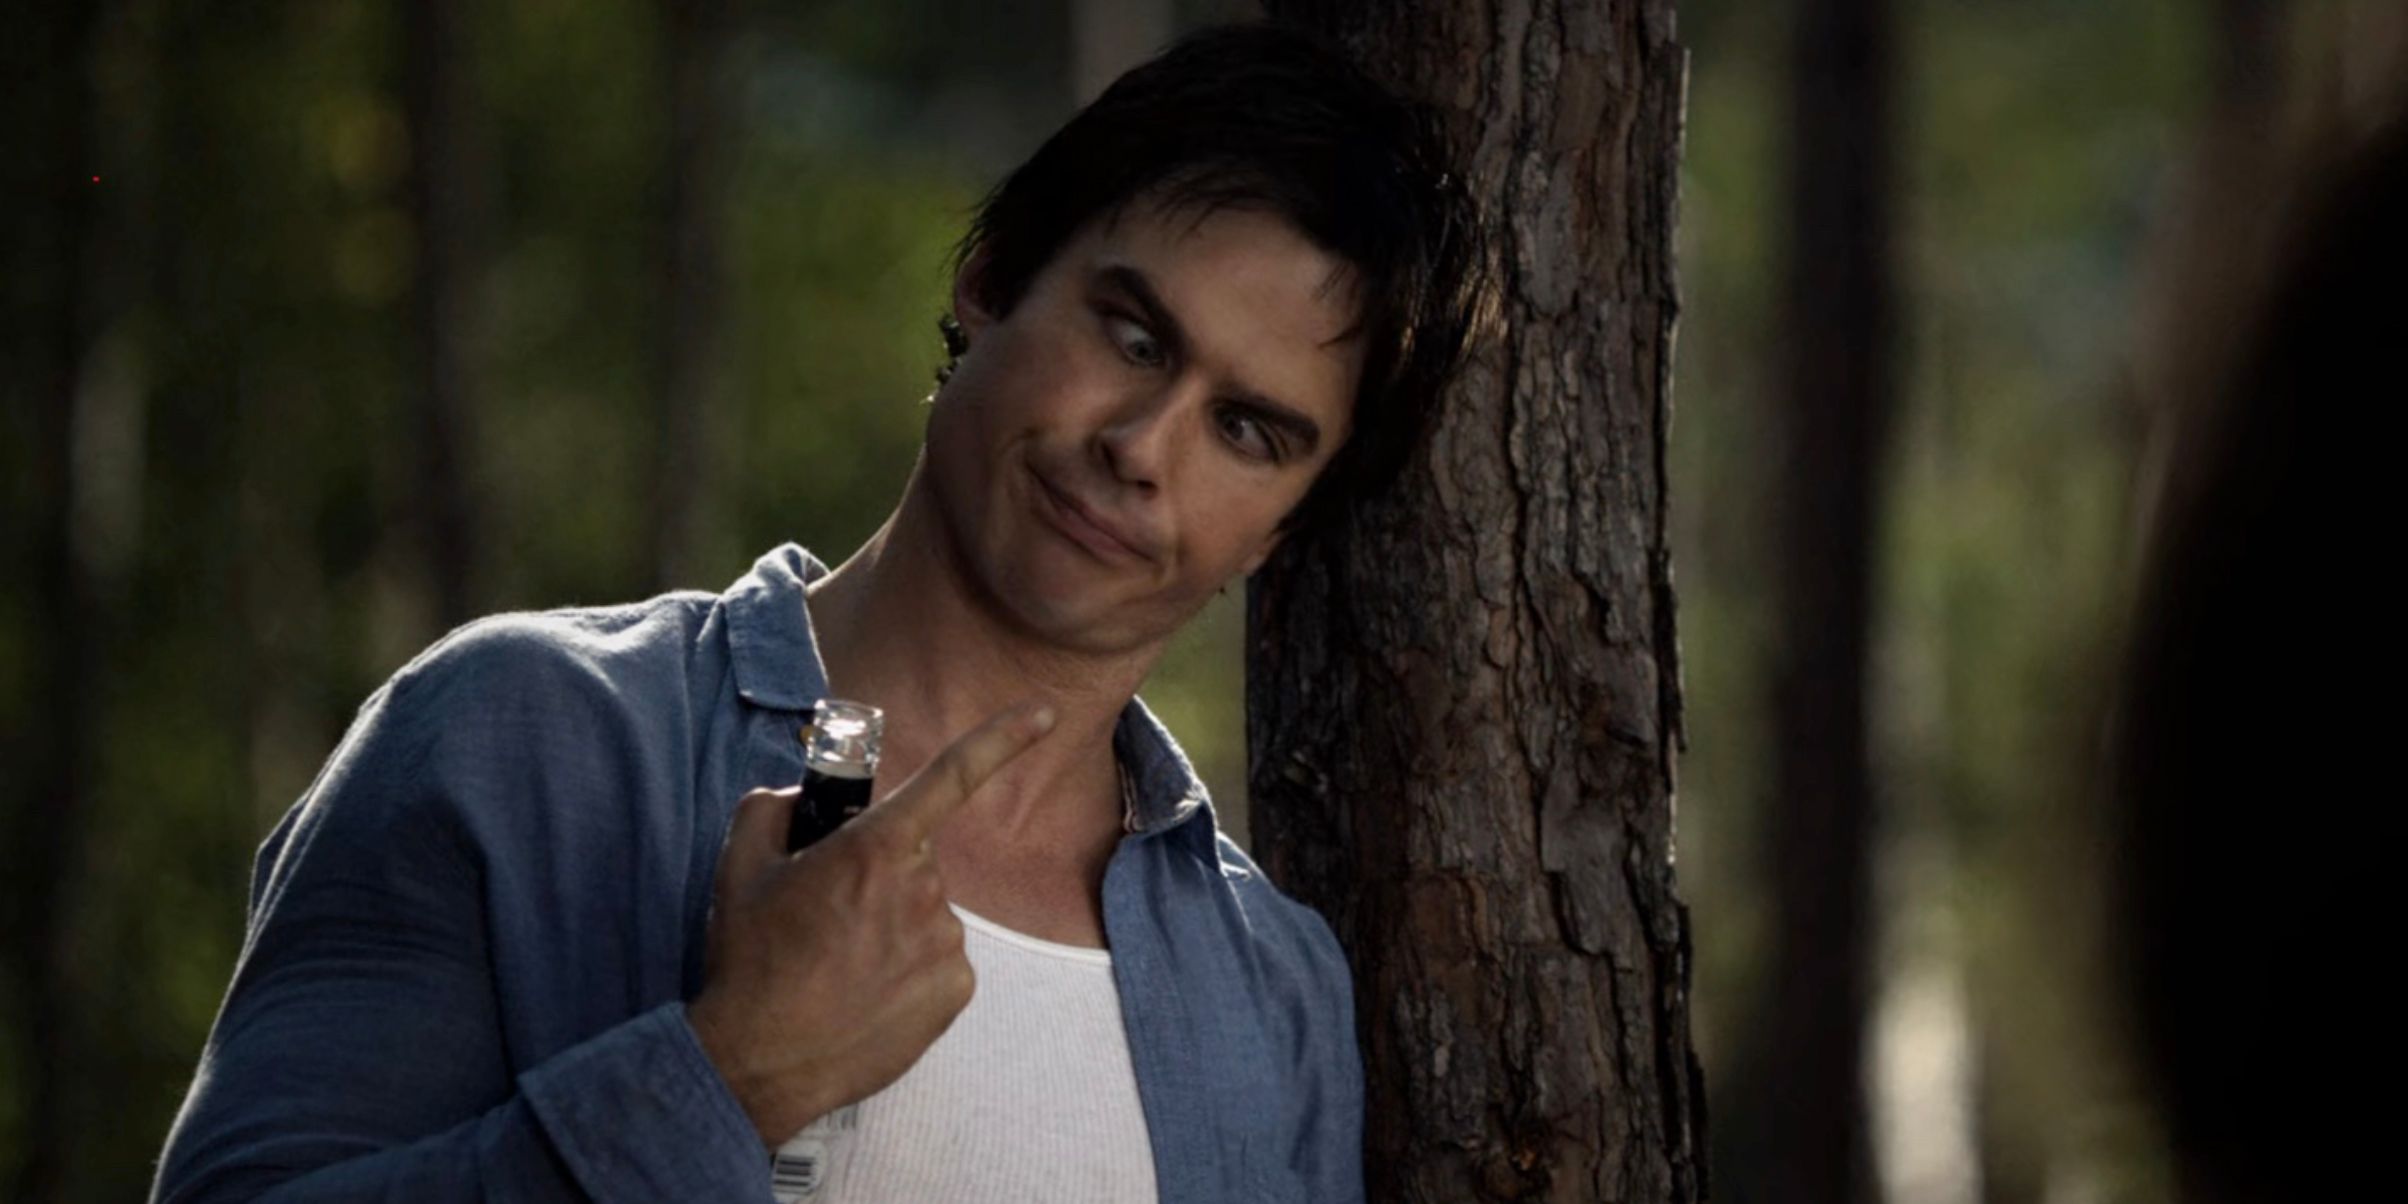 Damon making a funny face in The Vampire Diaries.